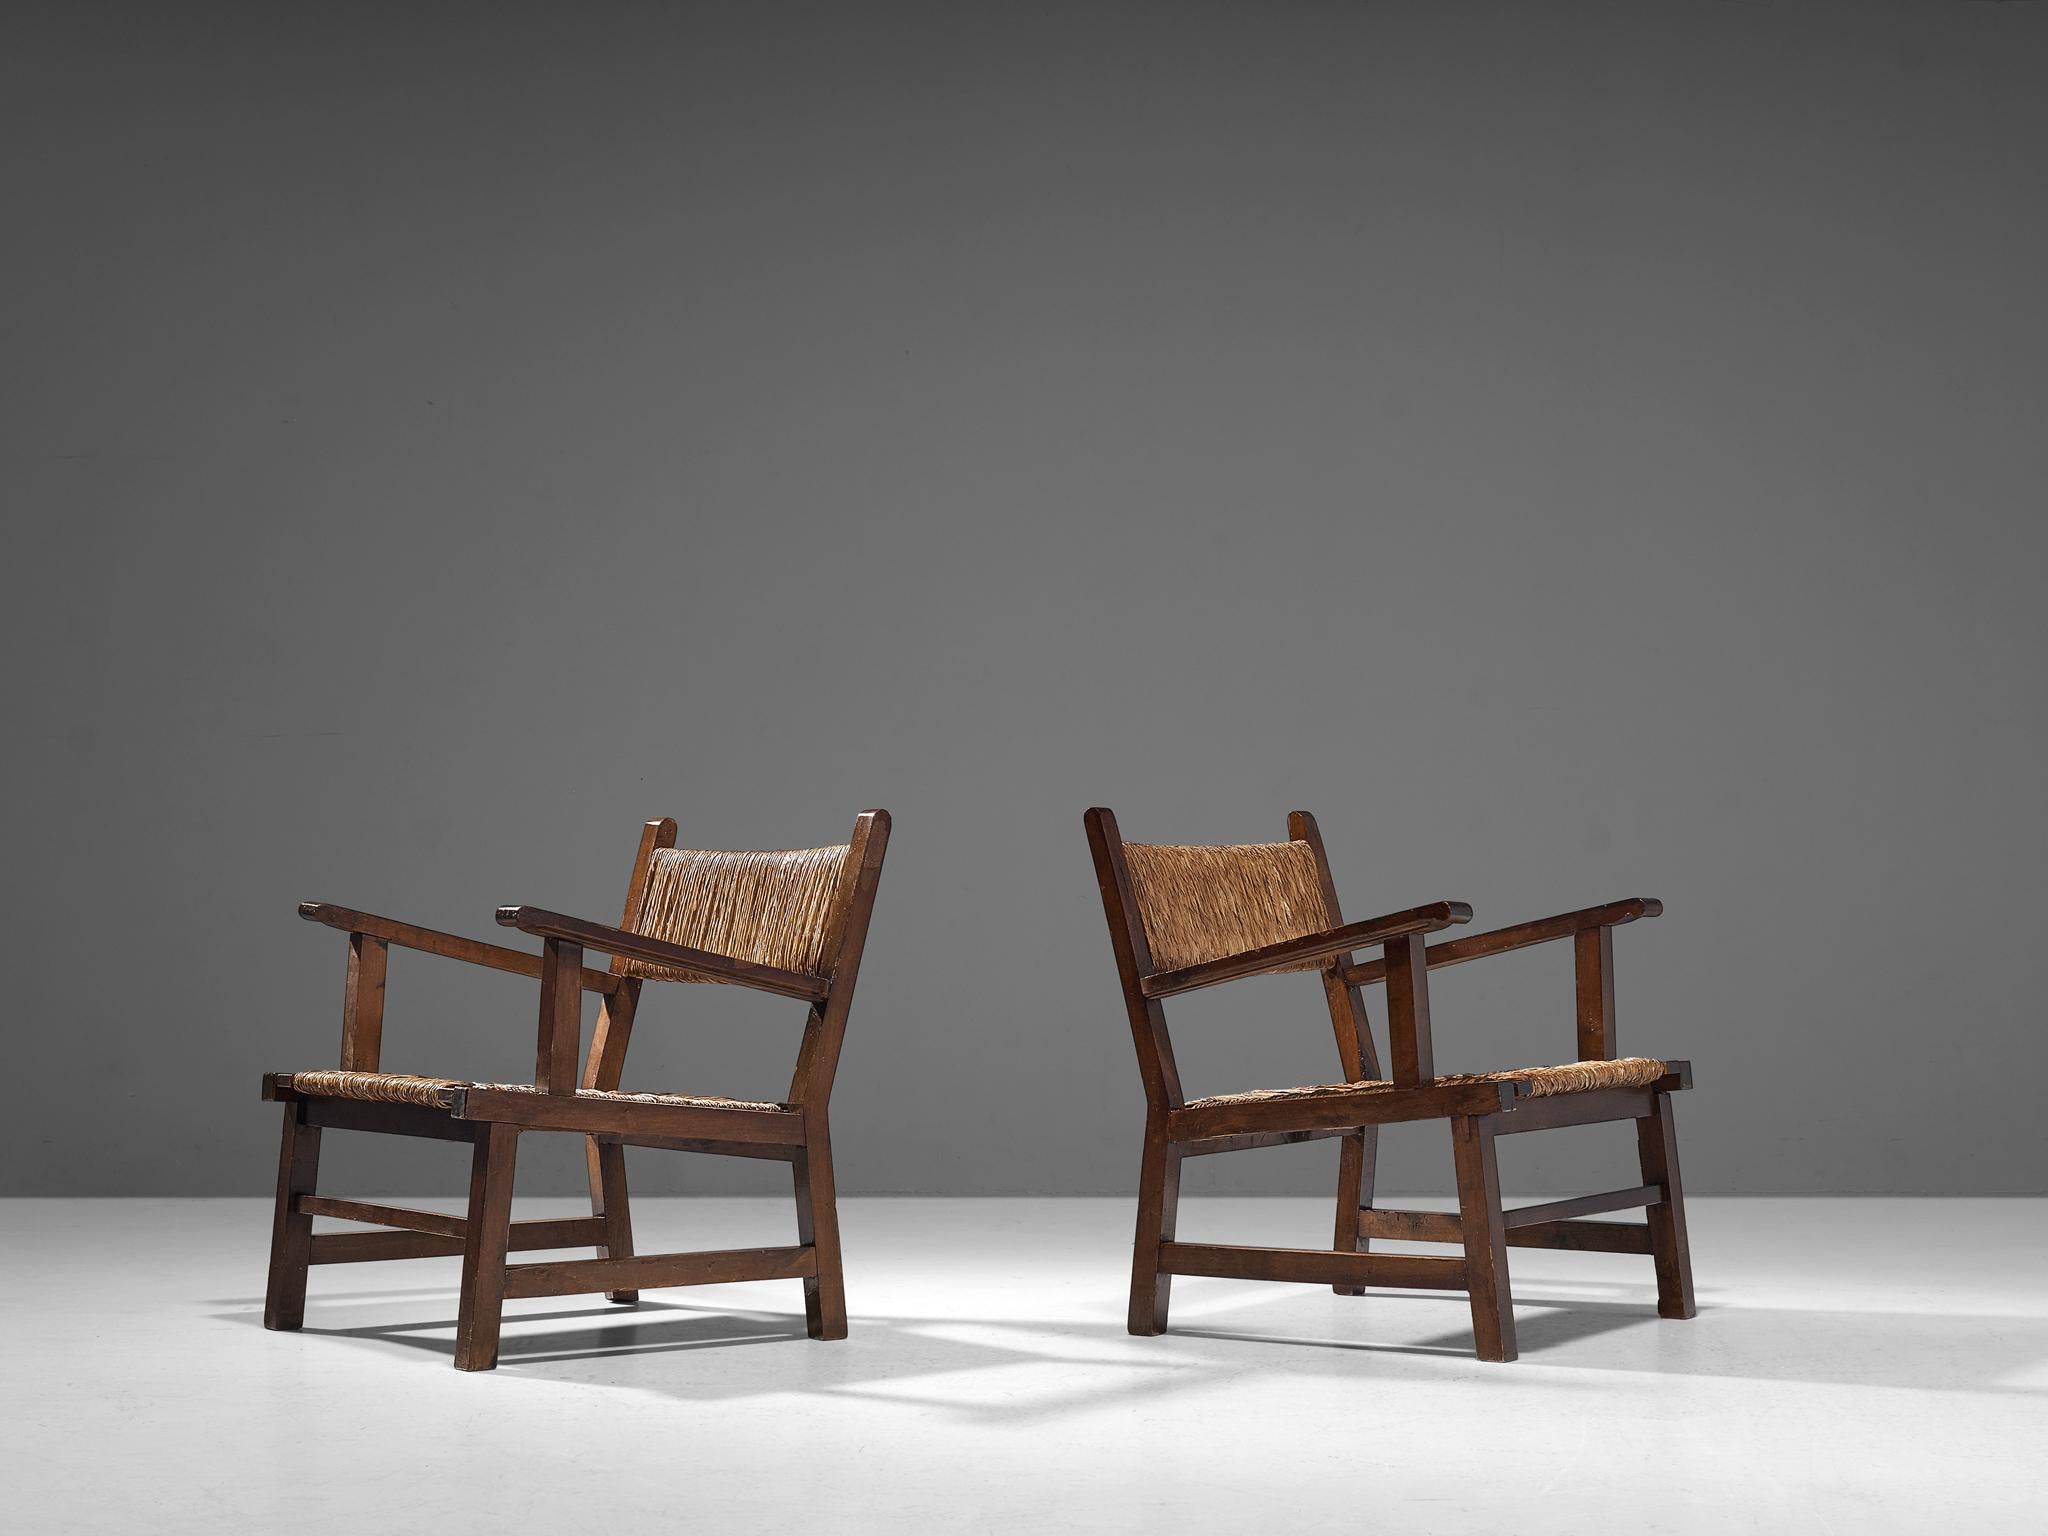 Pair of armchairs, stained wood, straw, Spain, 1950s

These beautifully constructed armchairs conceal an evolved rustic character with great quality of elegance. The wooden frame features a solid construction of straight lines and round corners.